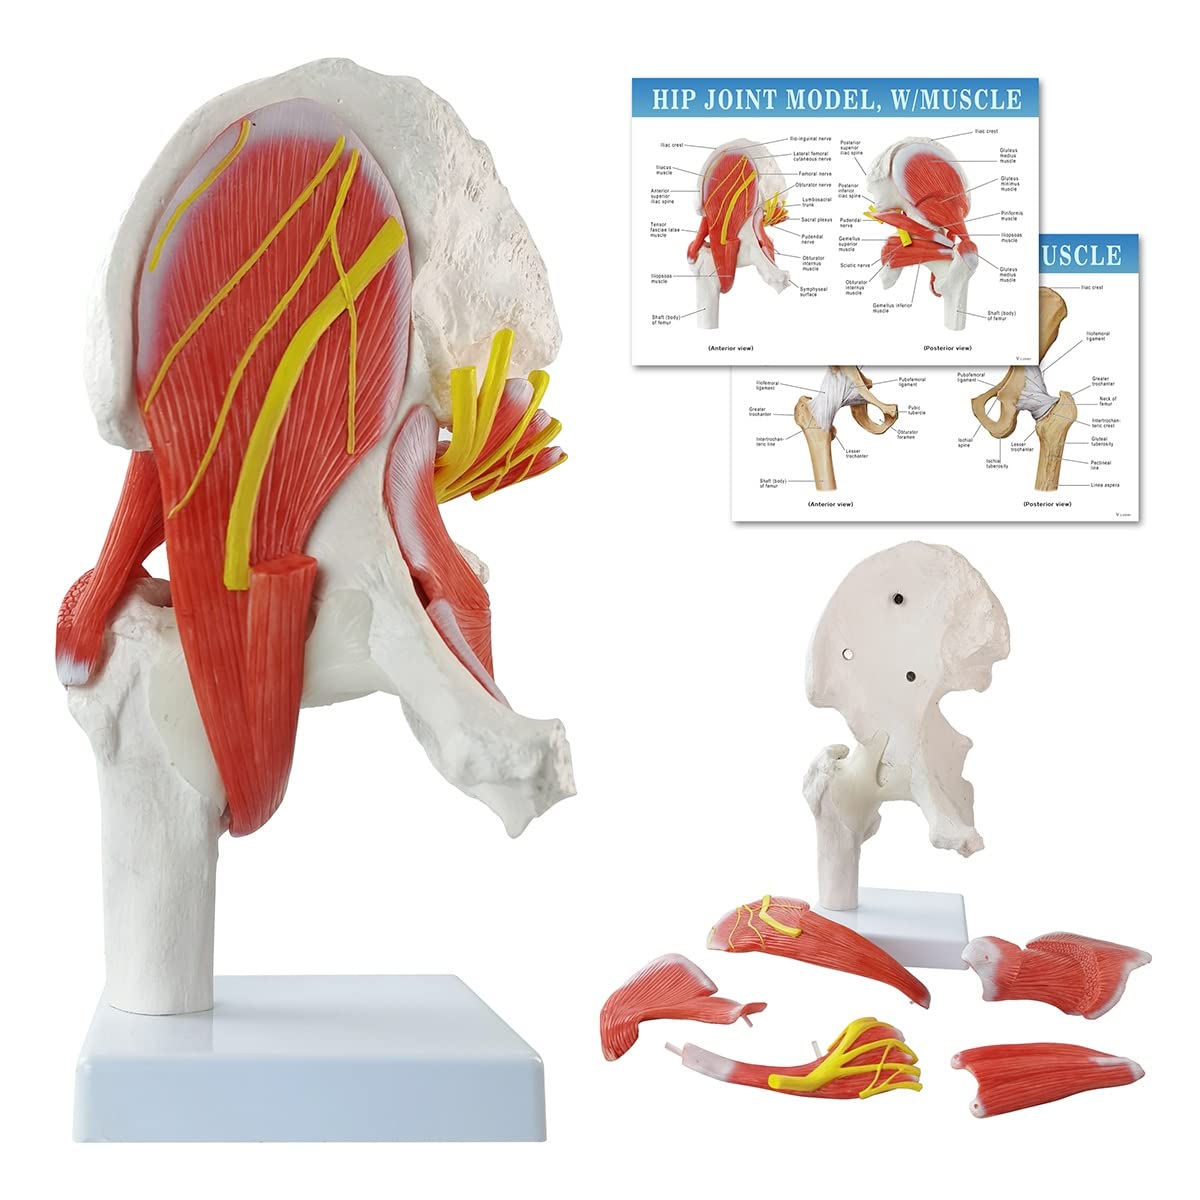 Hip-Joint-Model-with-Removable-Muscles-6-Parts-Life-Size-Human-Hip-Joint-Anatomy-Replica-of-Hip-Bone-Muscles-